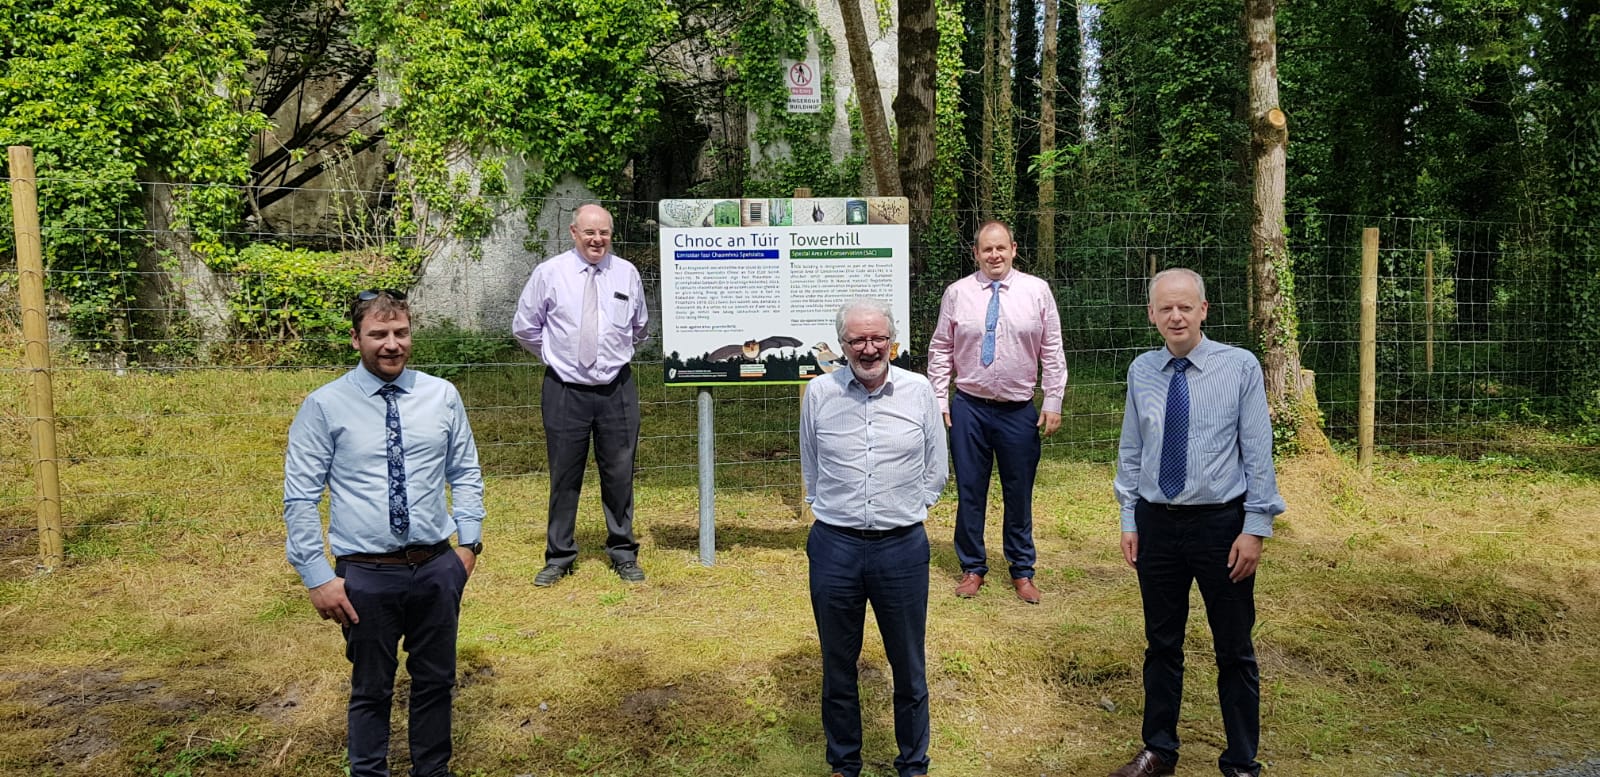 Coillte welcome new strategic partnership for historic Moorehall, Towerhill, Clonee and Derrinrush forests